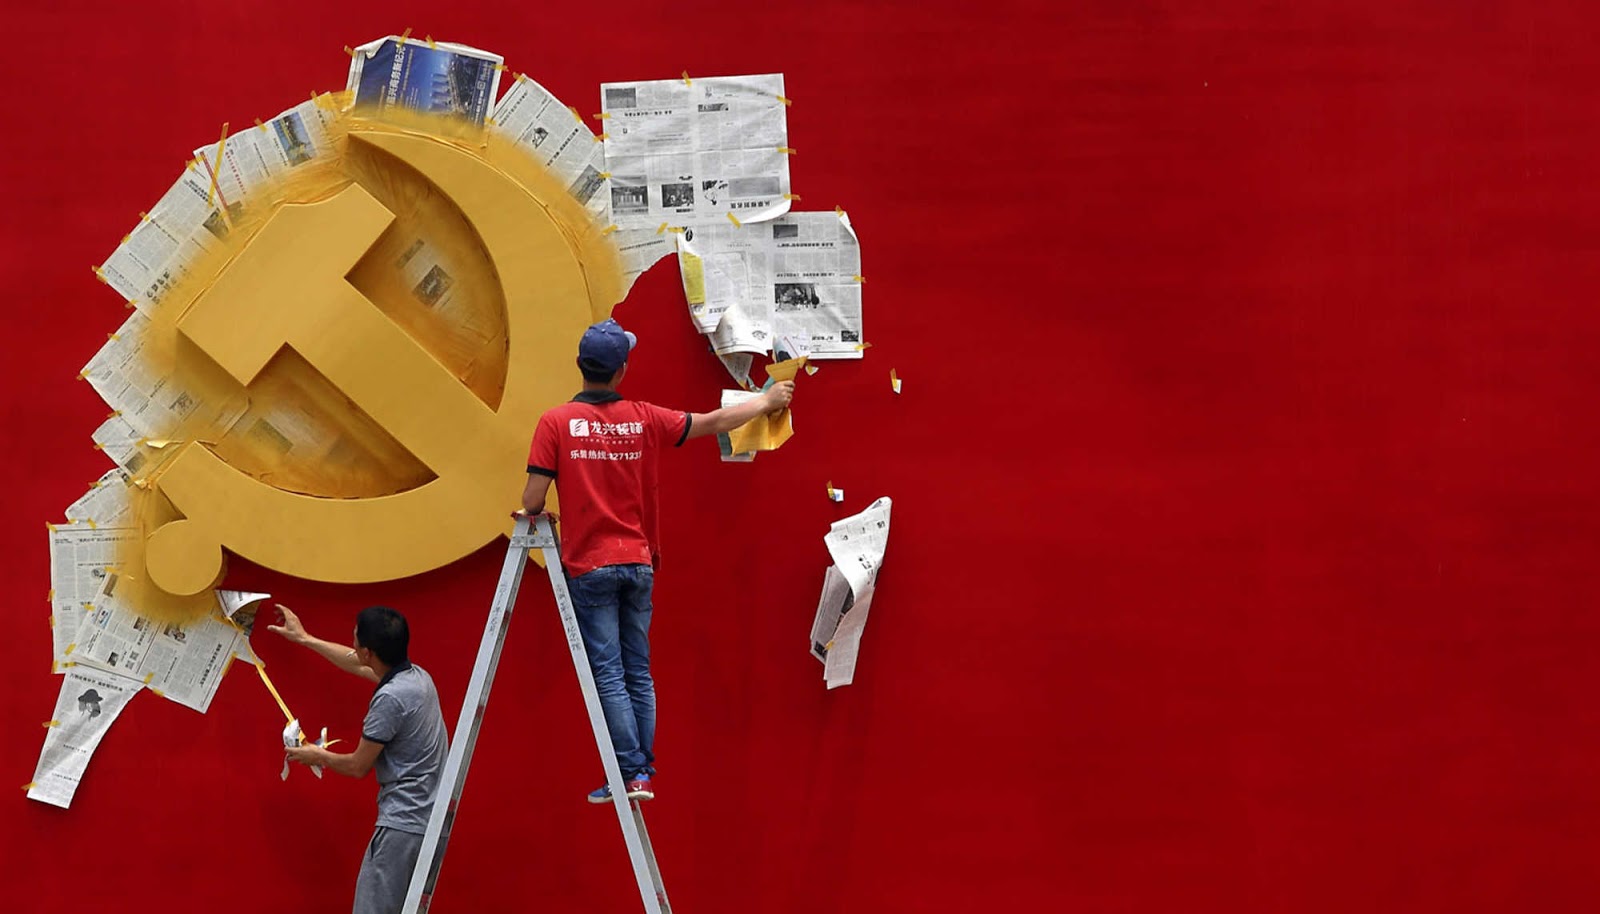 Workers peel papers off a wall as they re-paint the Chinese Communist Party flag on it at the Nanhu revolution memorial museum in Jiaxing, Zhejiang province May 21, 2014. REUTERS/Chance Chan